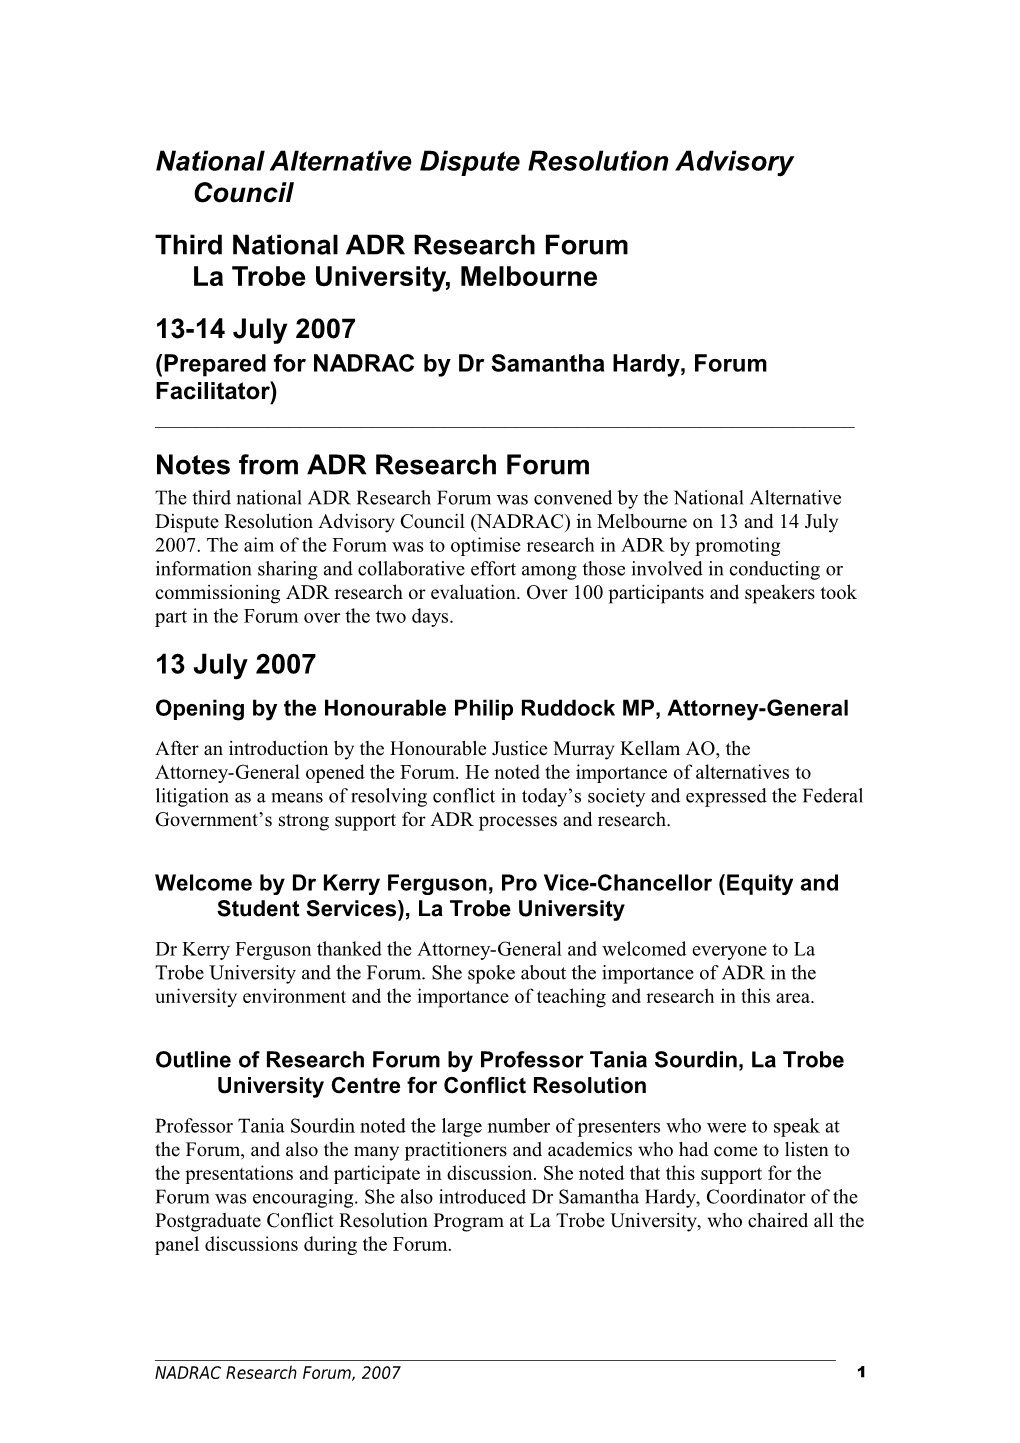 Notes from Third National ADR Research Forum